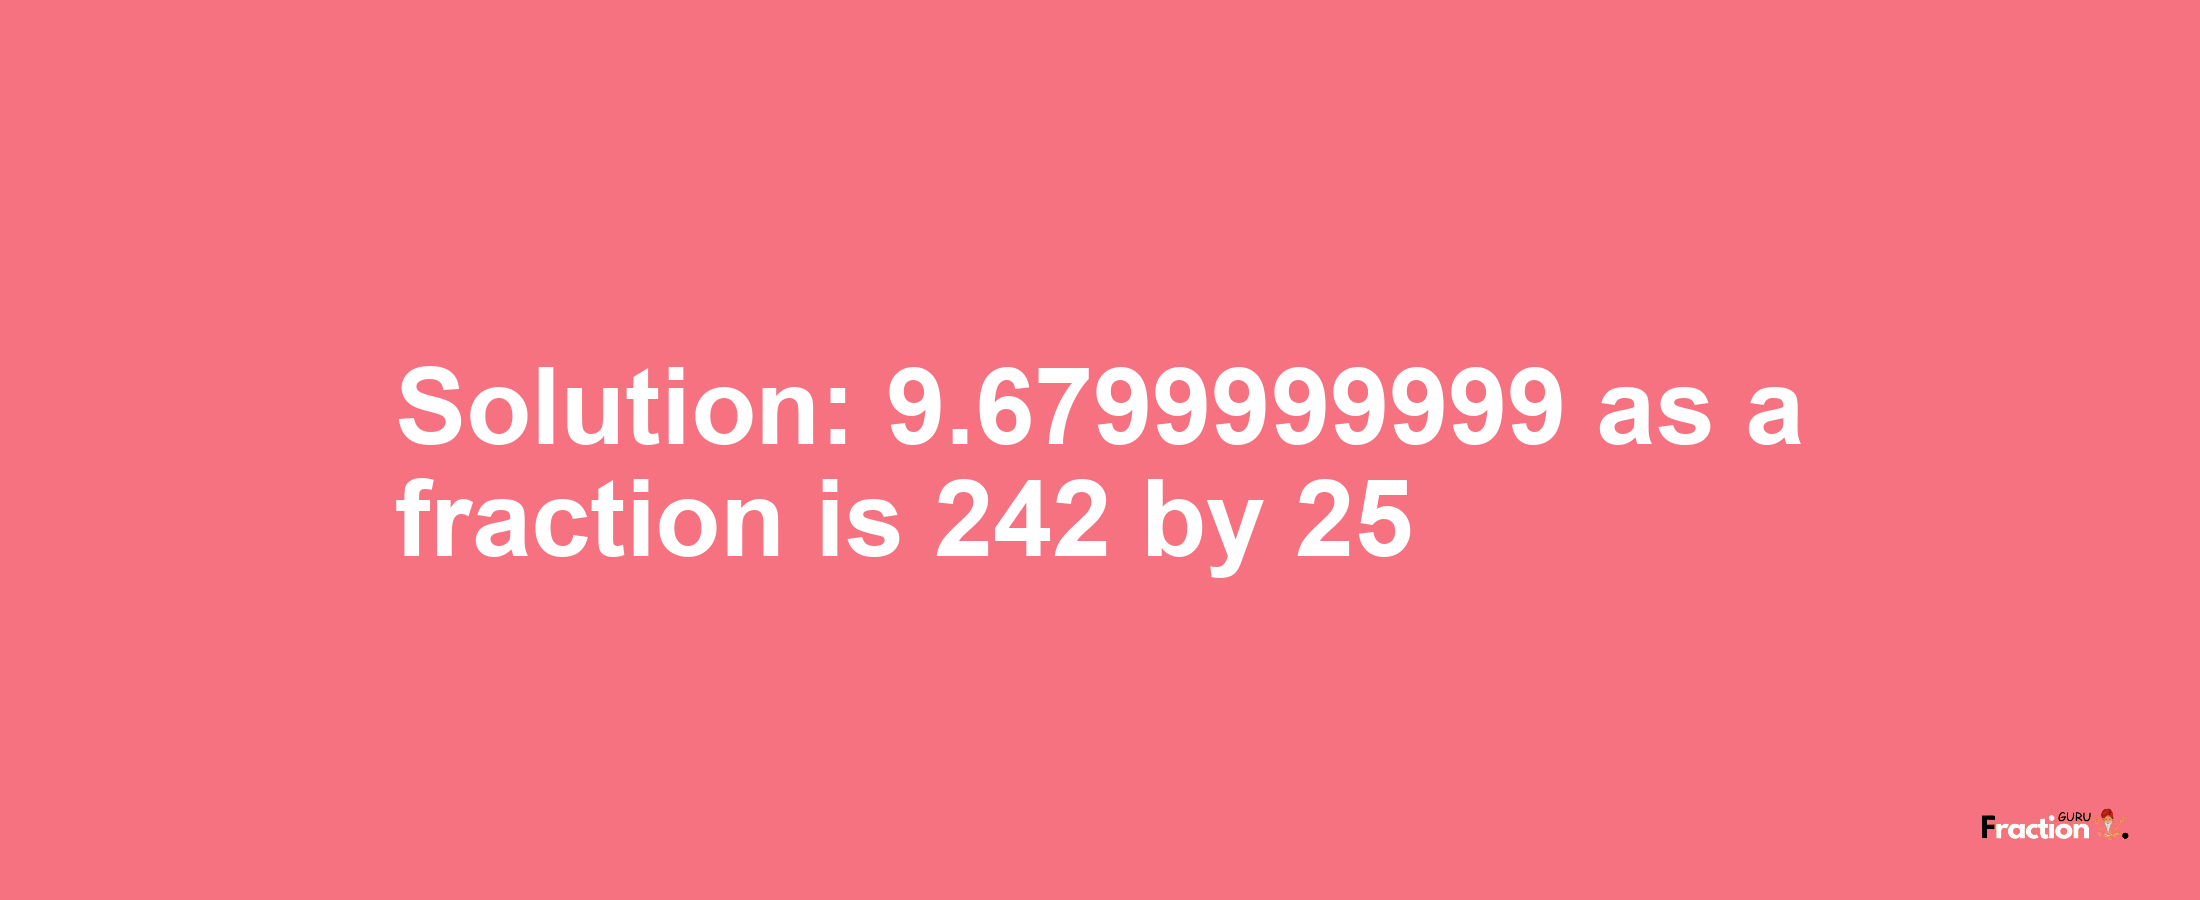 Solution:9.6799999999 as a fraction is 242/25